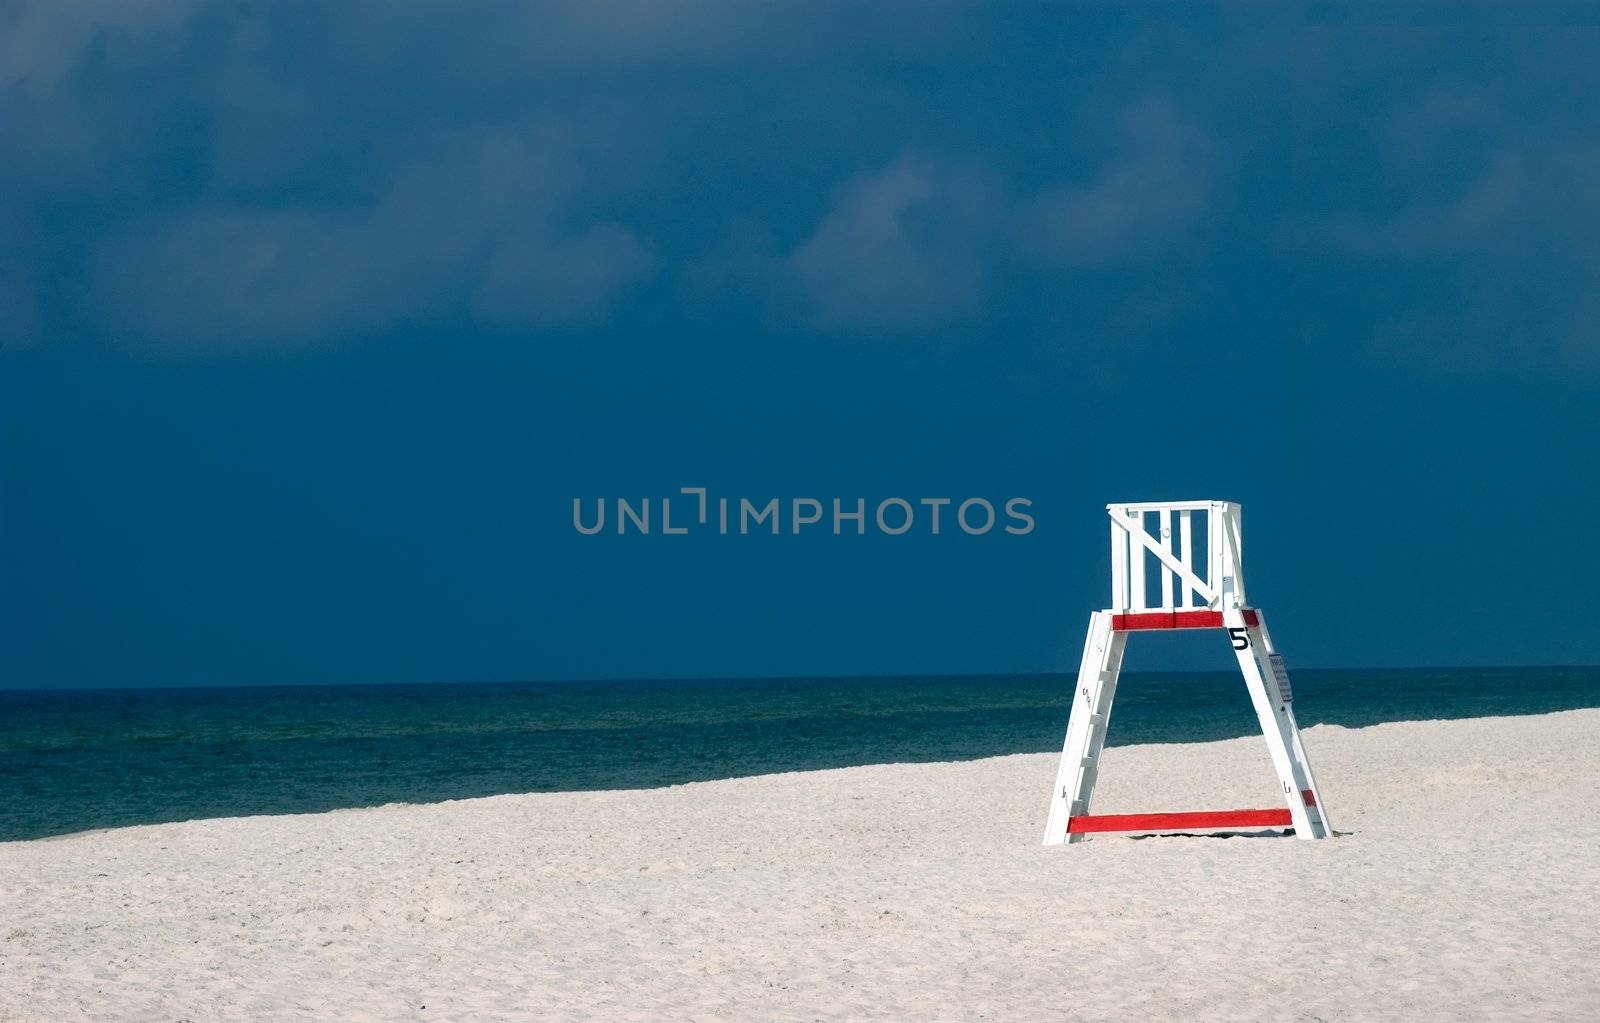 Lifeguard Chair on Deserted Beach by griffre